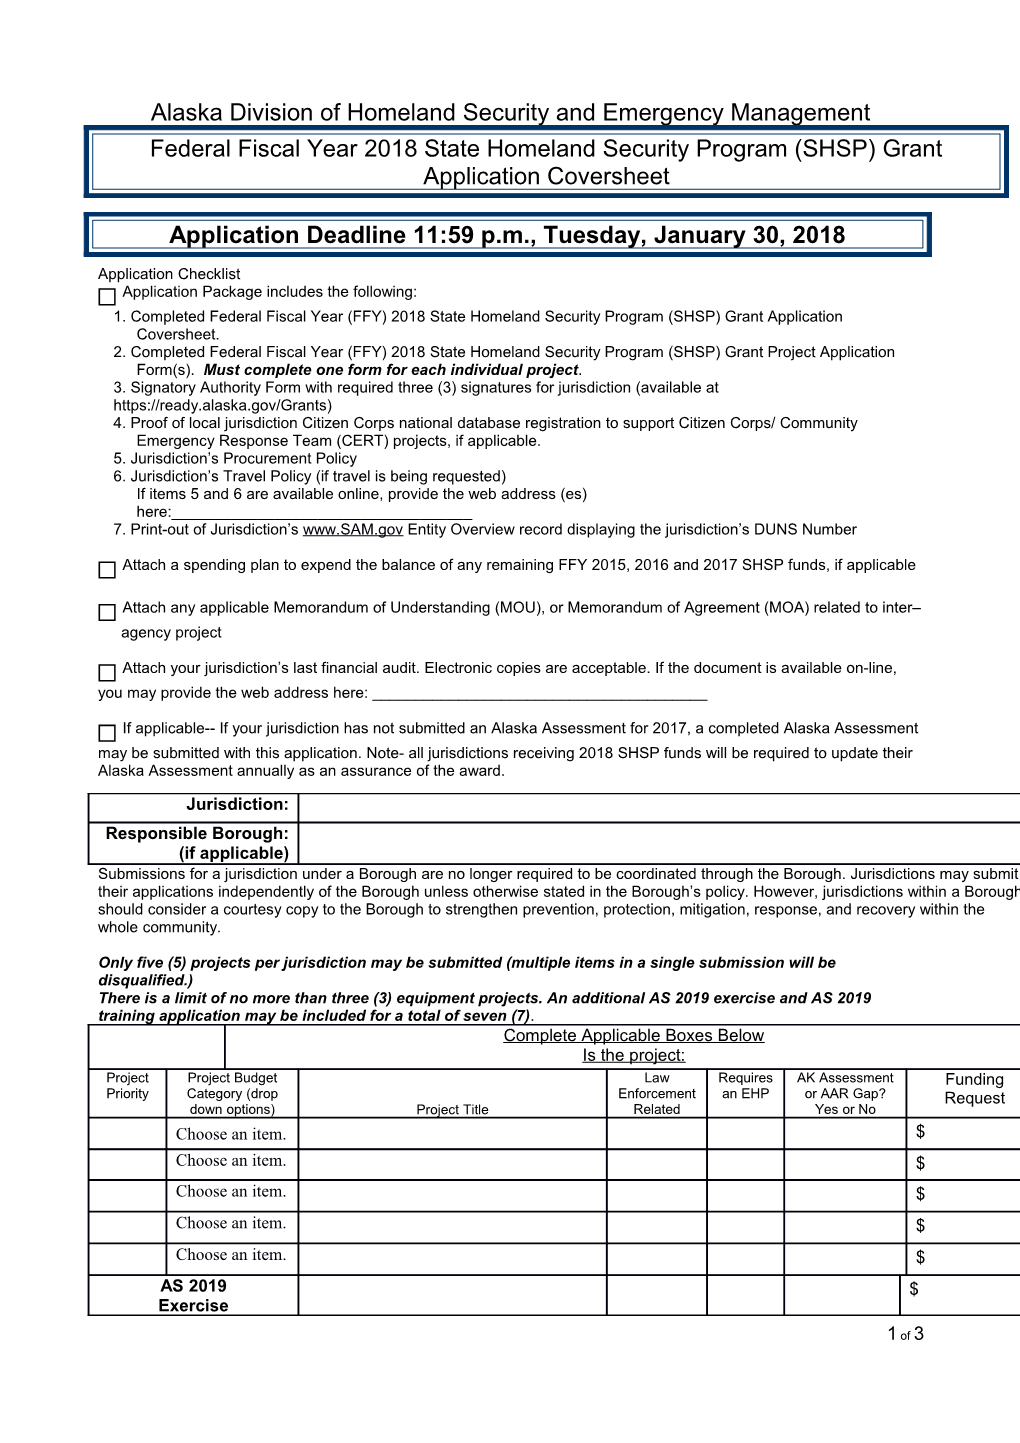 Federal Fiscal Year 2008 Homeland Security Grant Program Application Coversheet